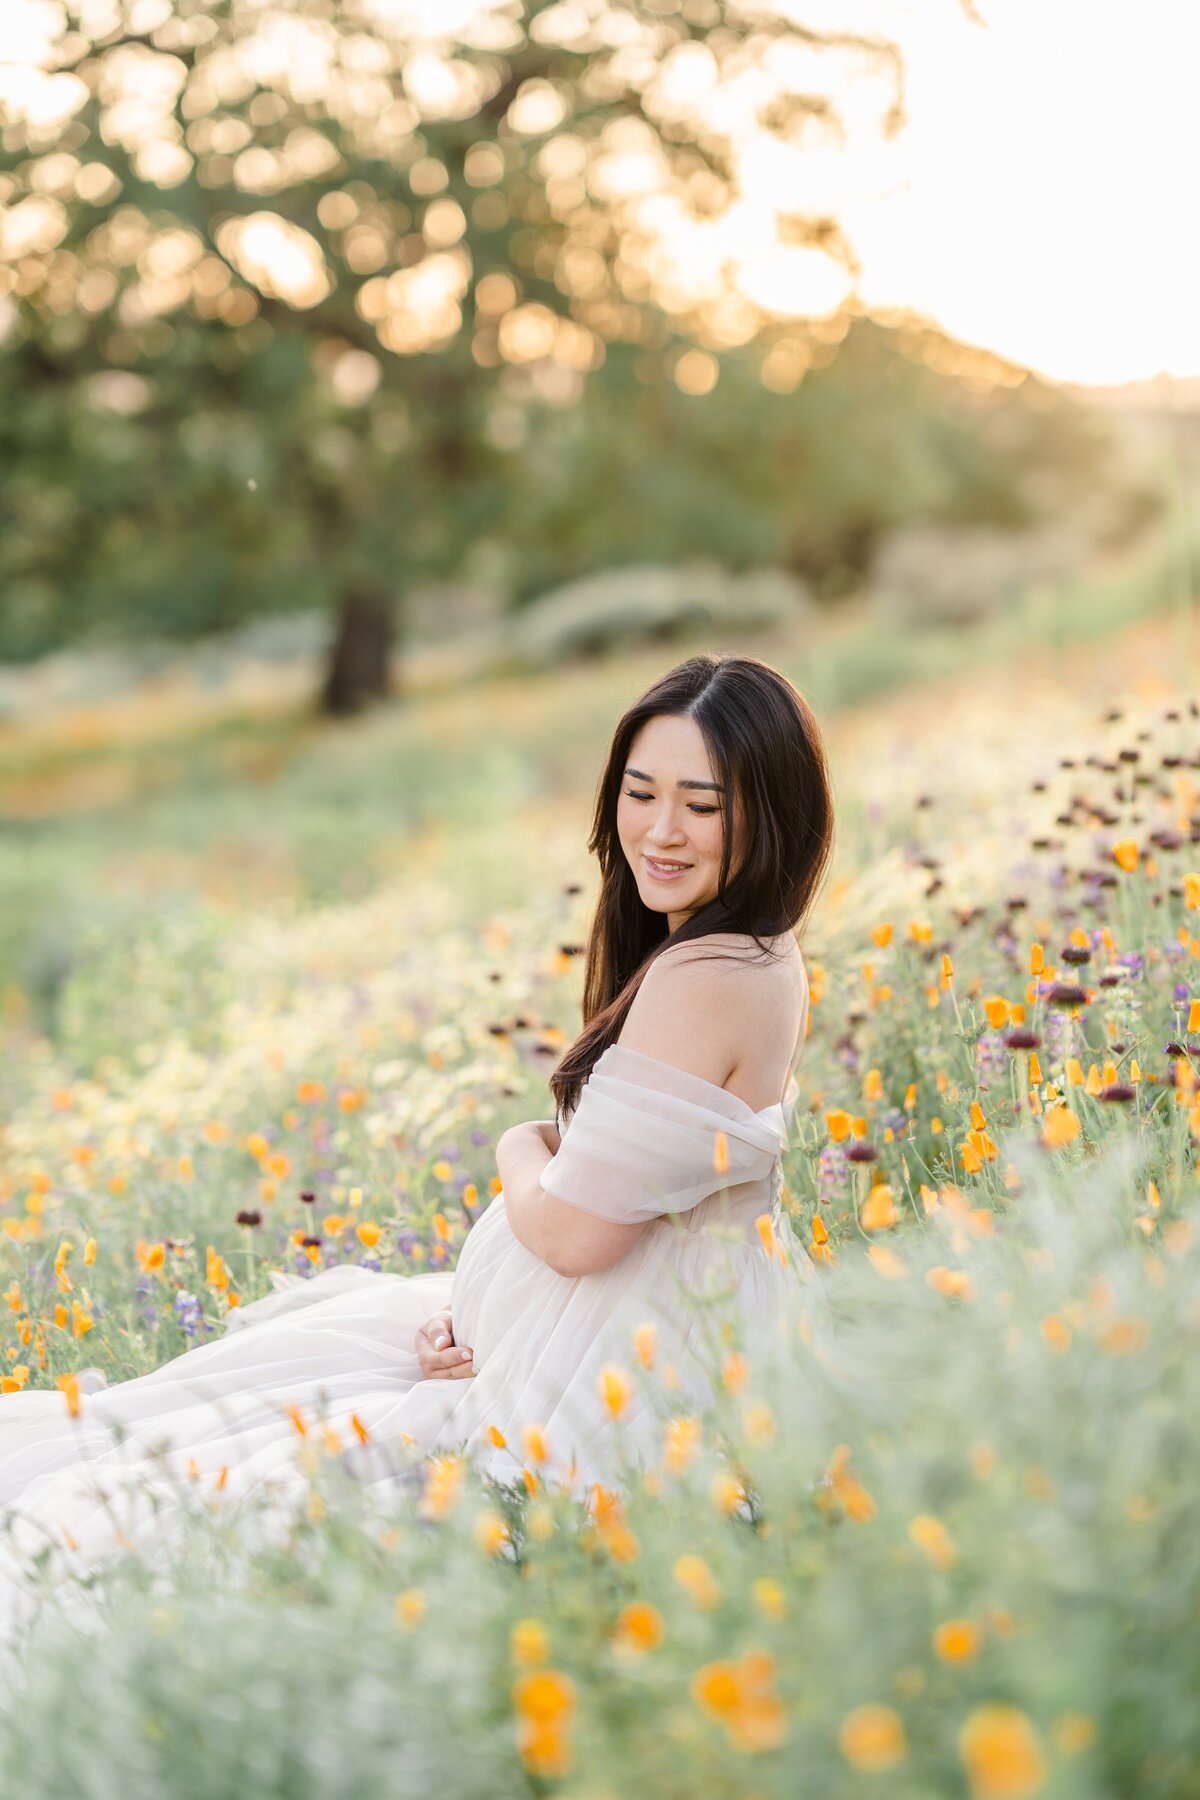 A maternity session photographed by Bay Area Photographer, Light Livin Photography shows an expecting mother sitting and caressing her baby bump in a field of poppies.